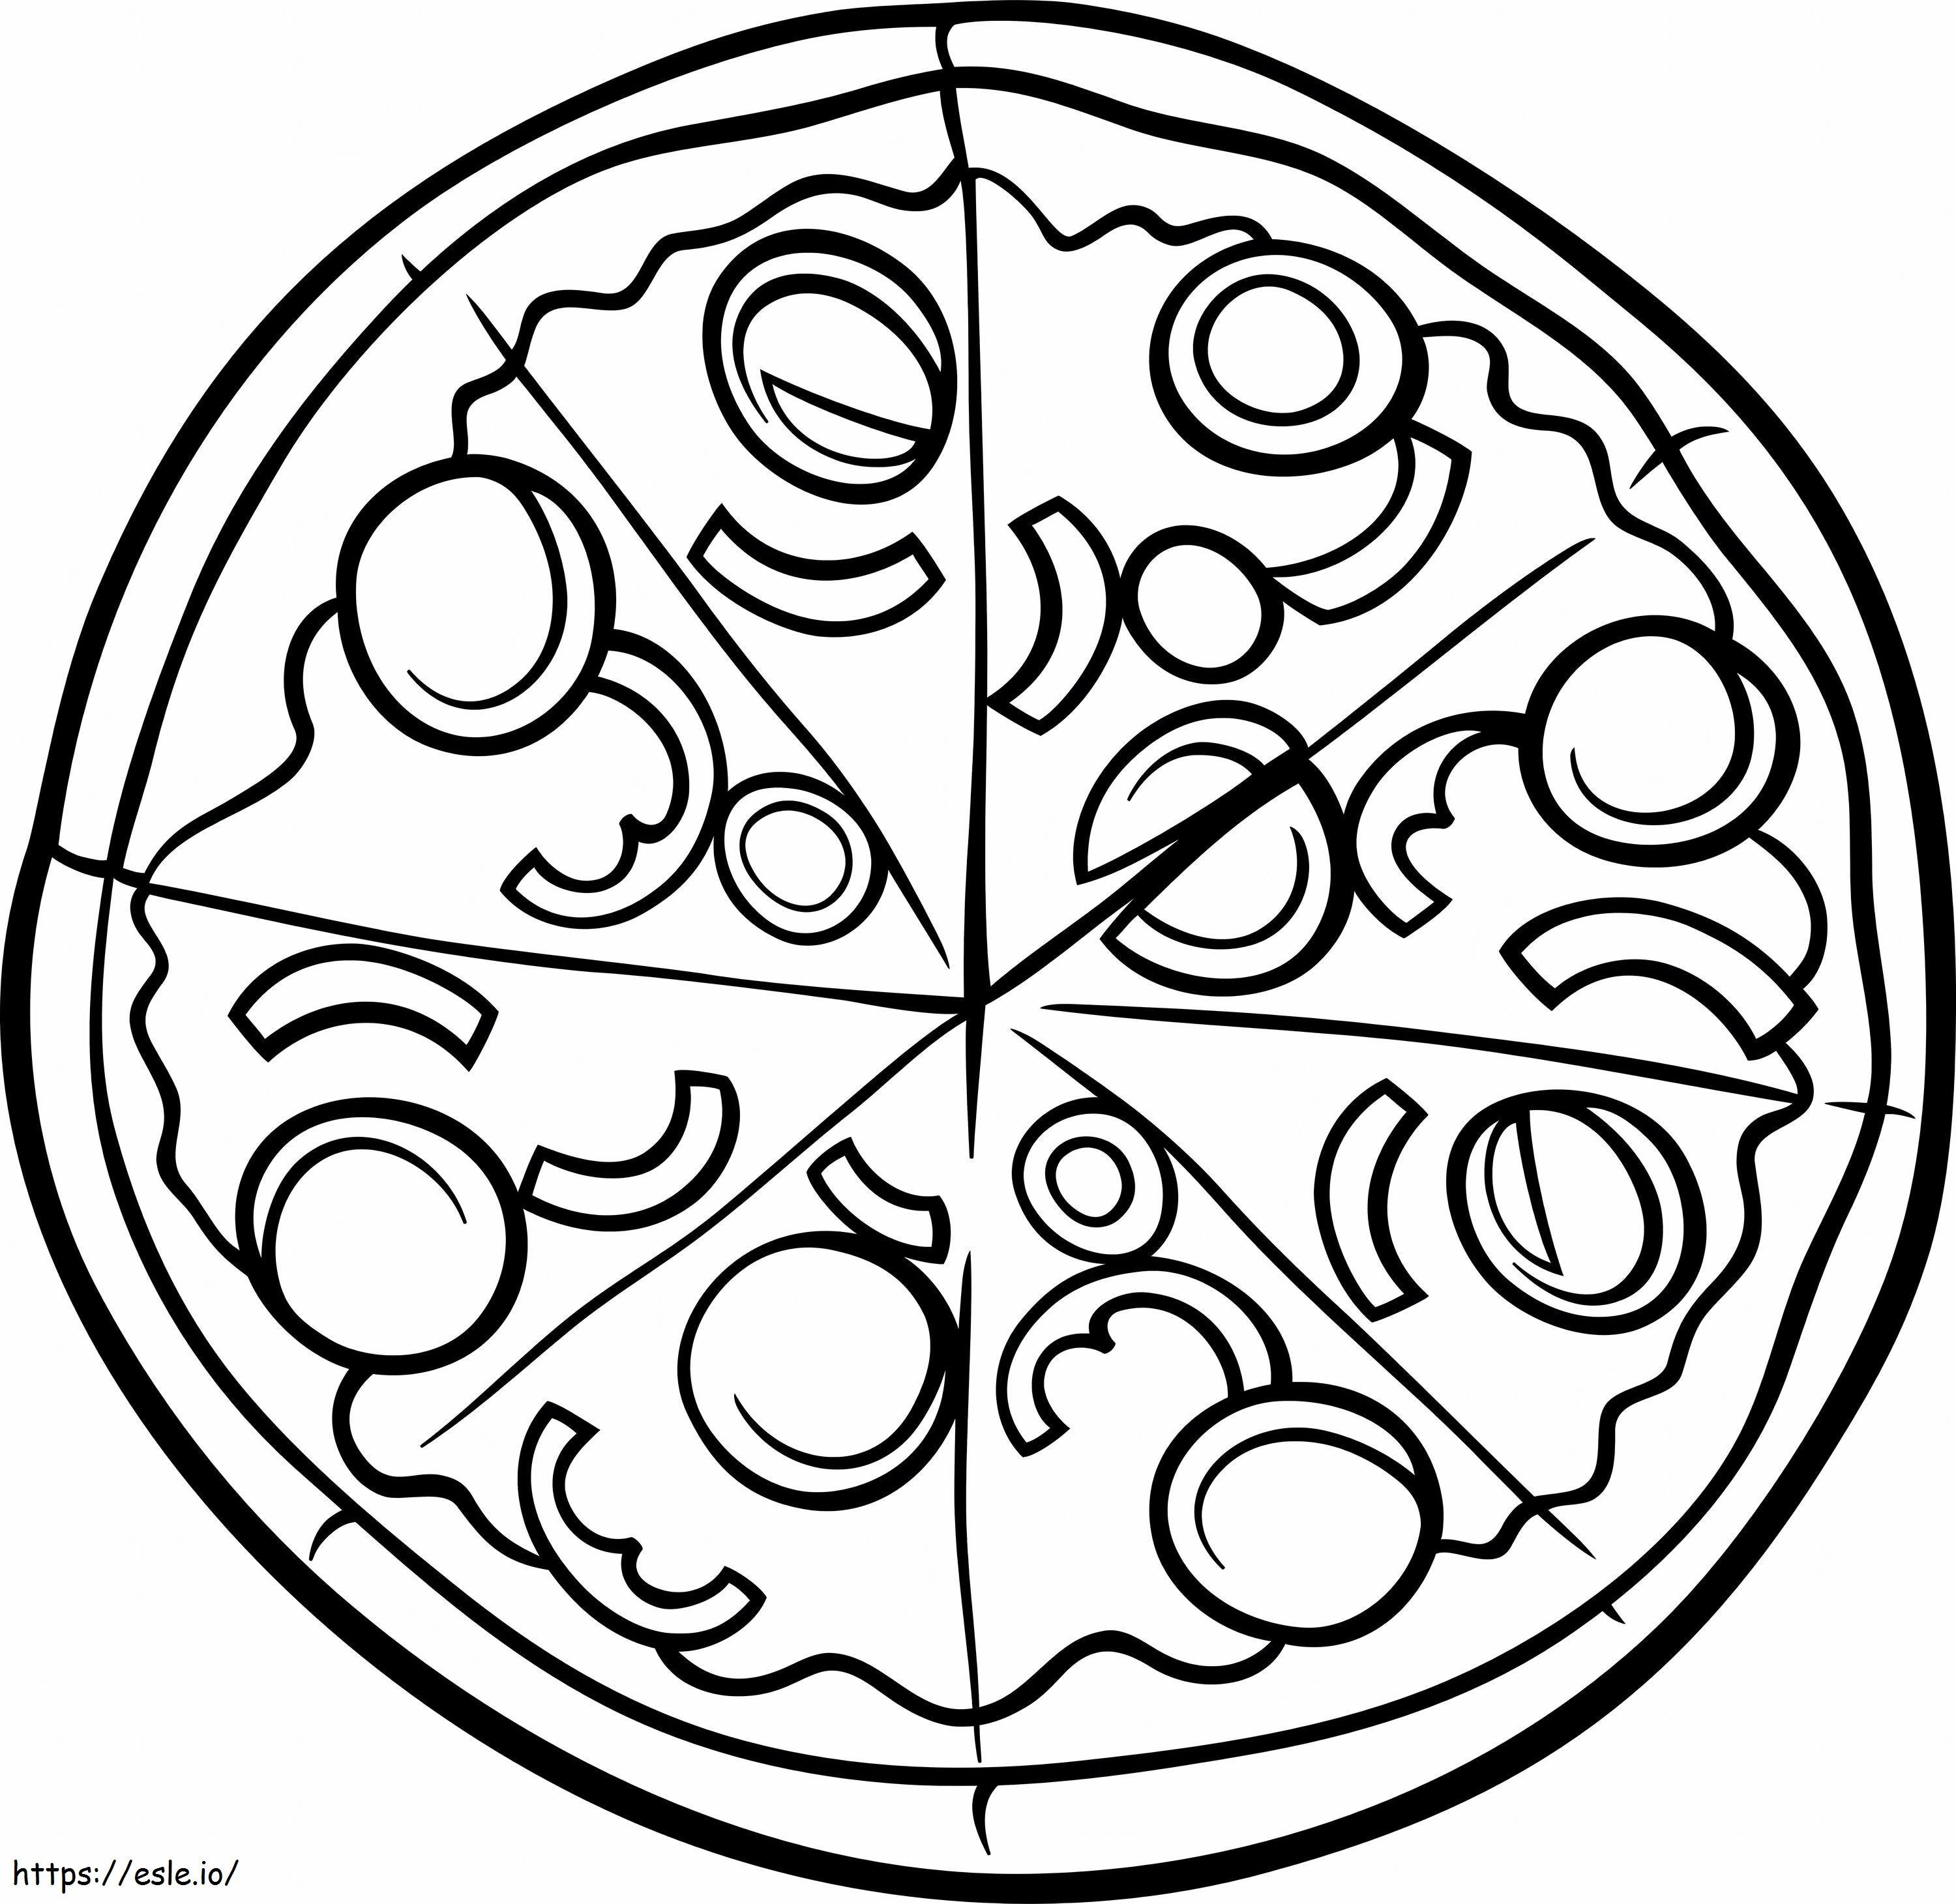 Circle Of Pizza coloring page